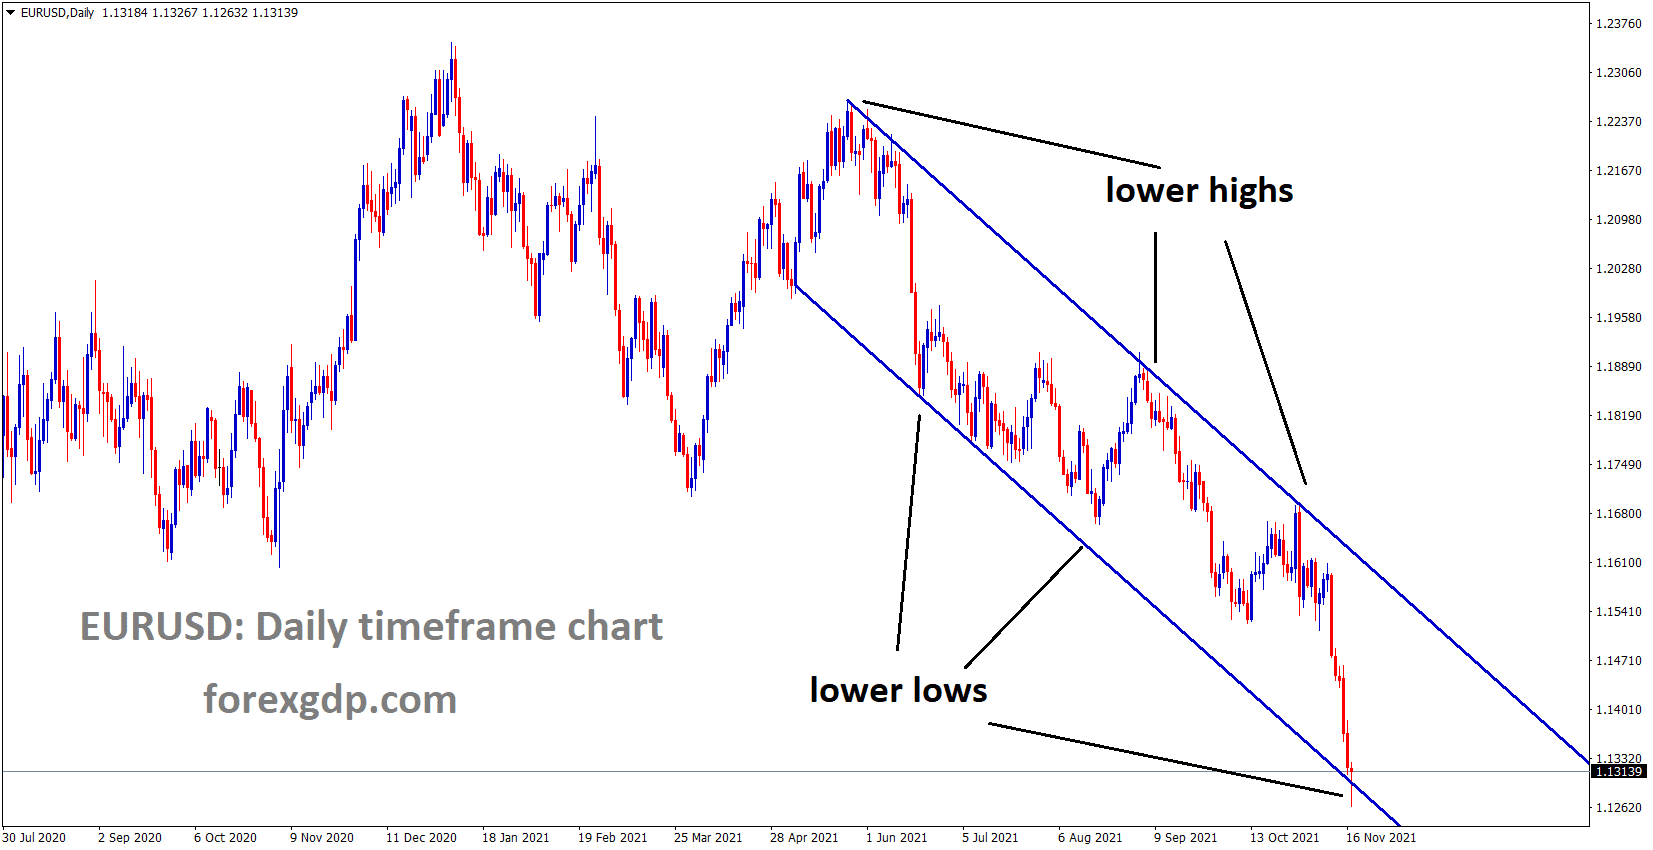 EURUSD is moving in the Descending channel and touched the lower low area of the channel